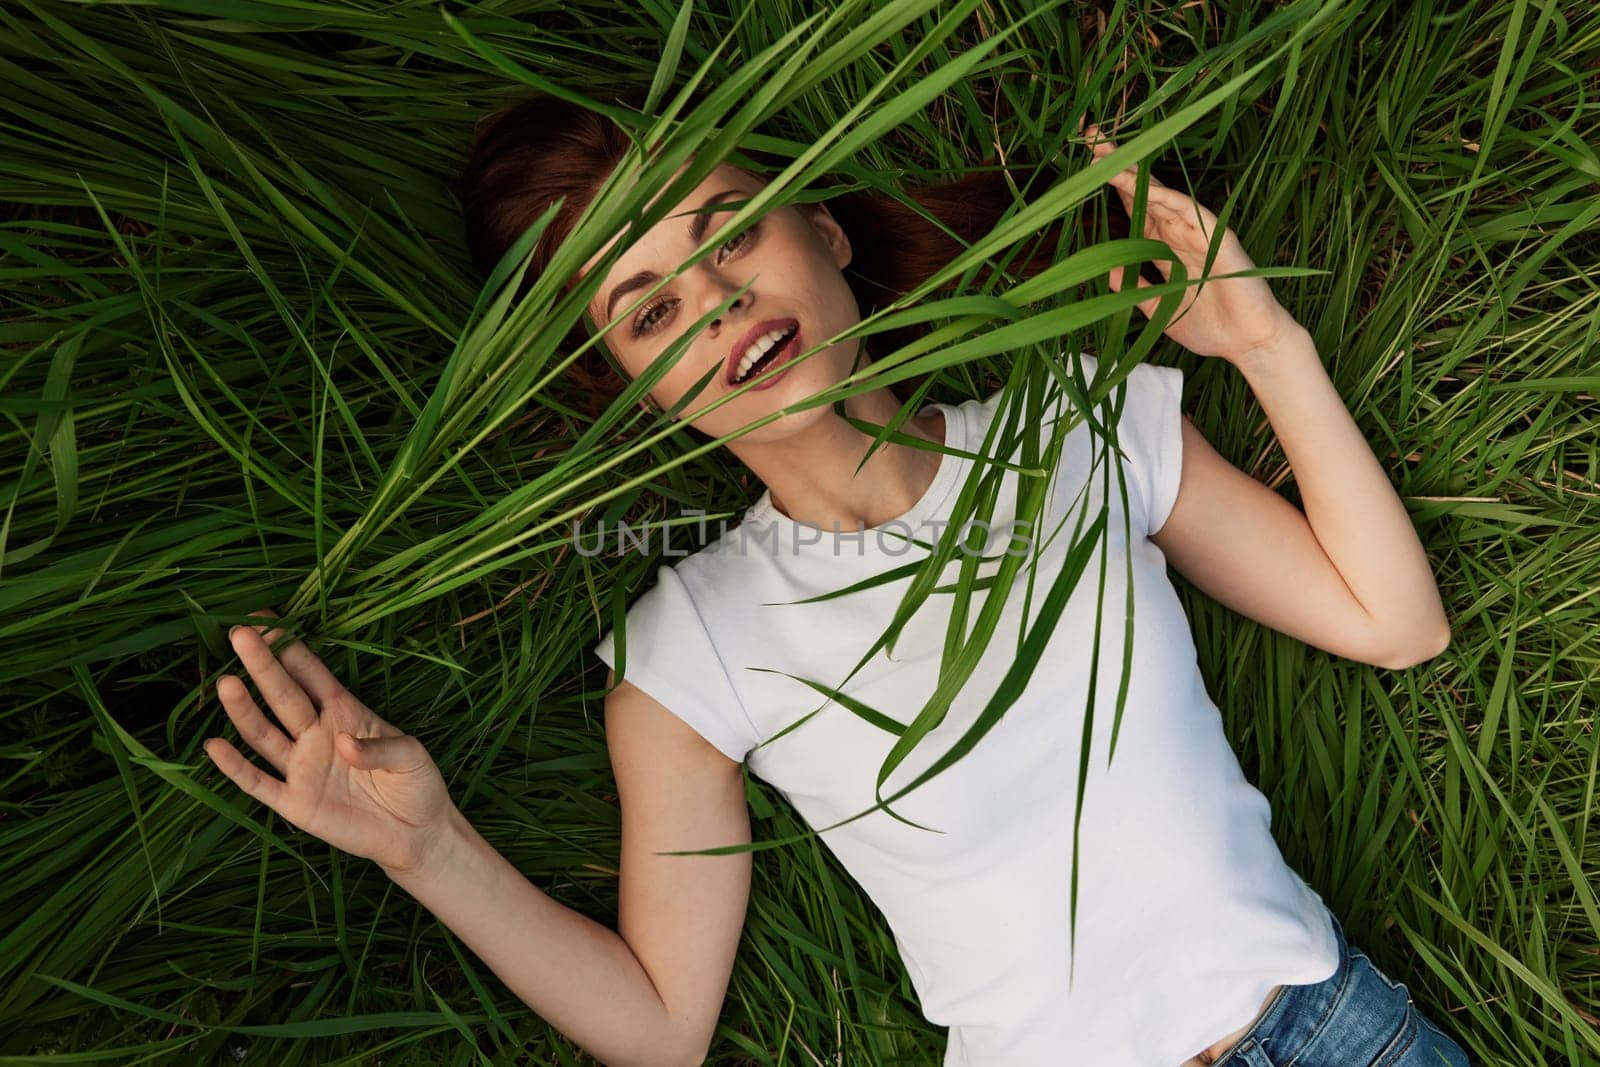 happy woman lies in high grass biting leaves with beautiful, even teeth by Vichizh